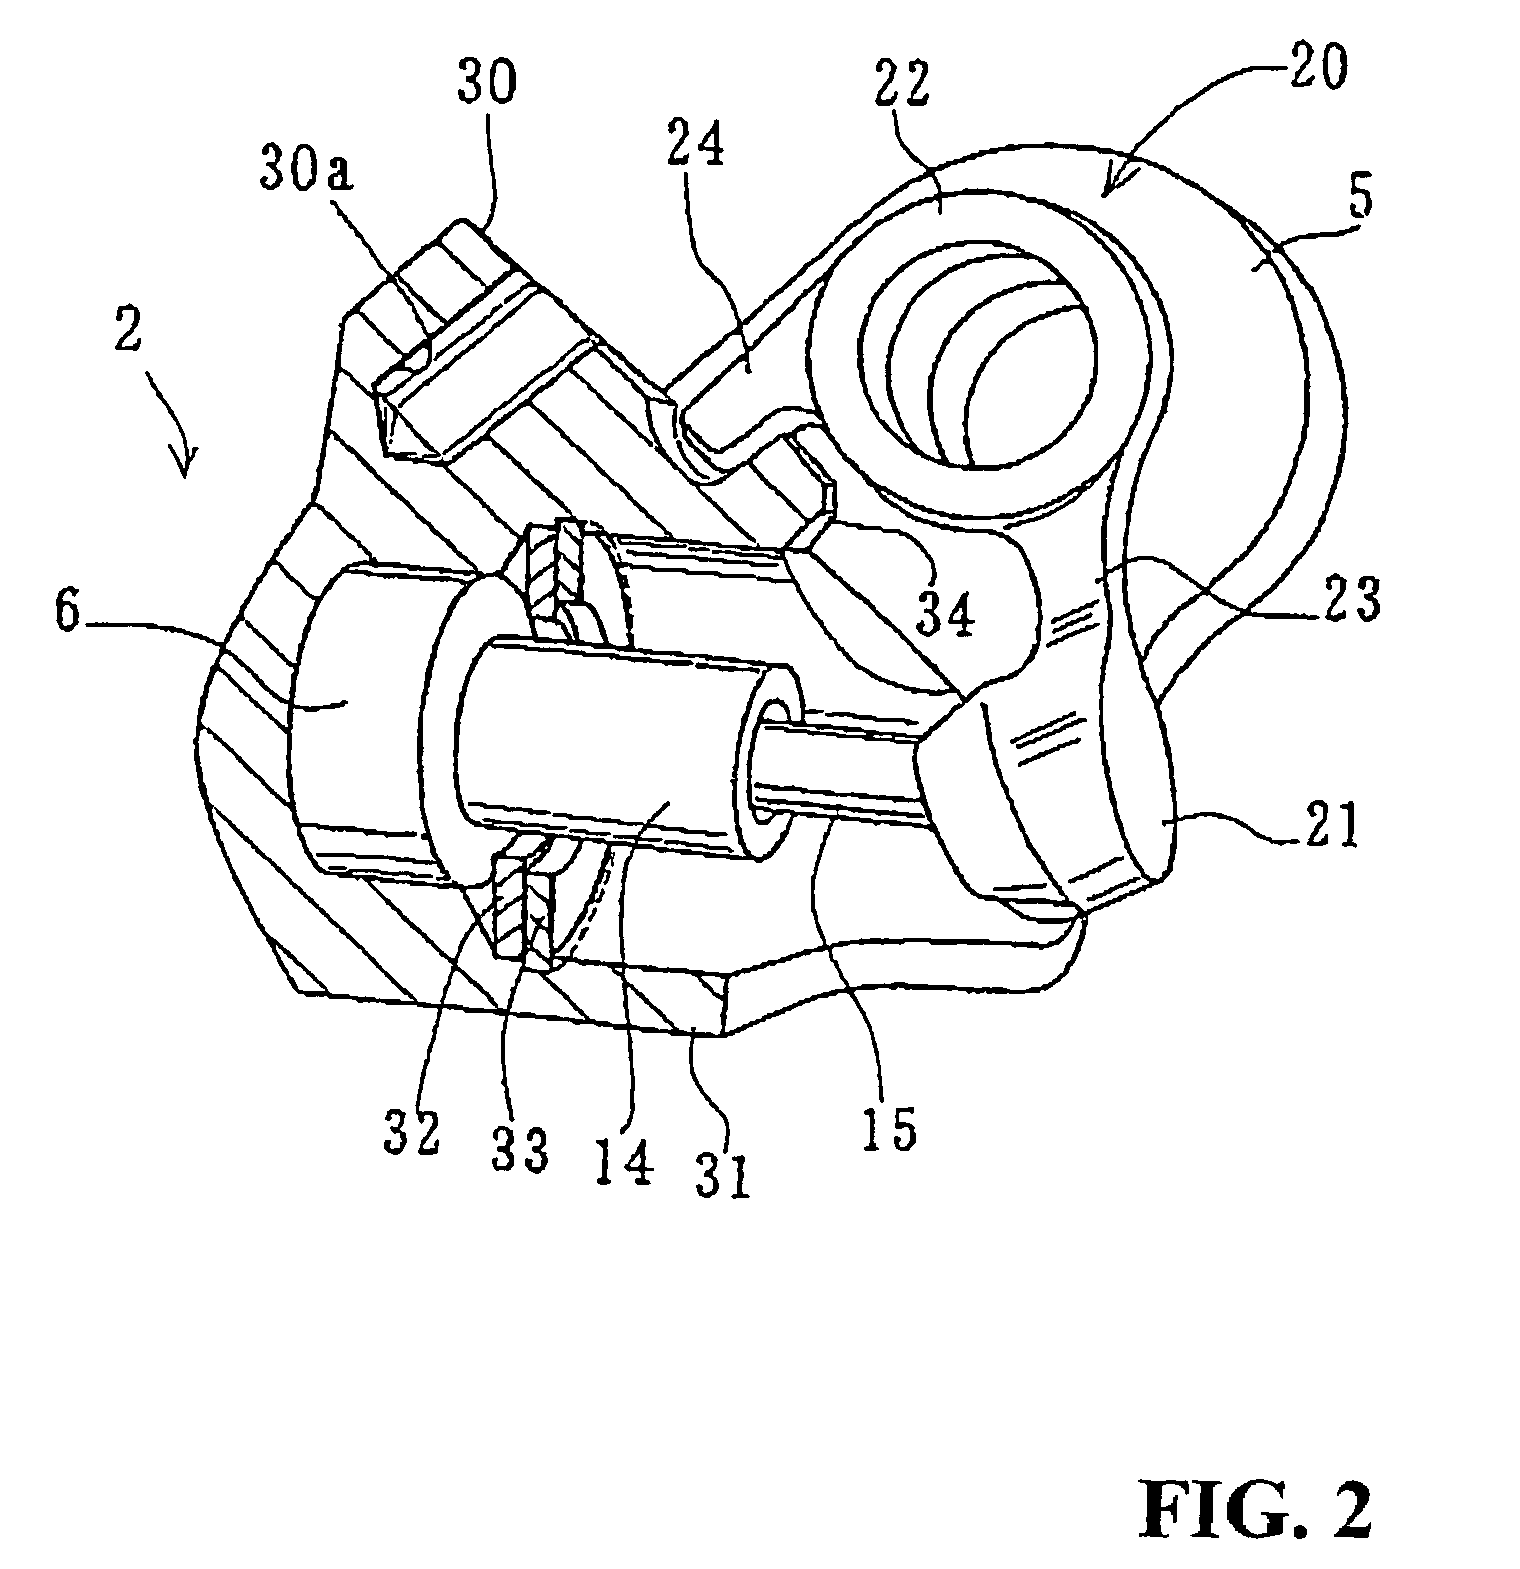 Lever device for hydraulic operation